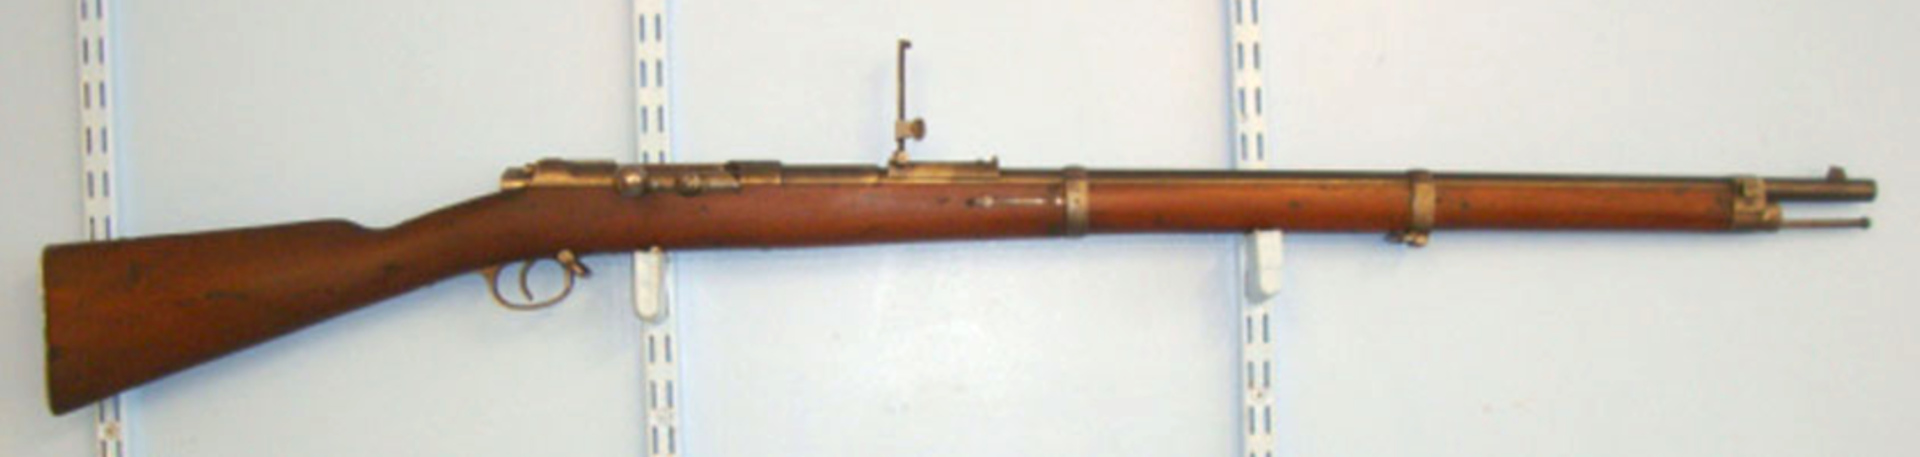 1887 Dated Imperial German Army Spandau Model 1871/84 11mm Tube Magazine Bolt Action Rifle - Image 2 of 3